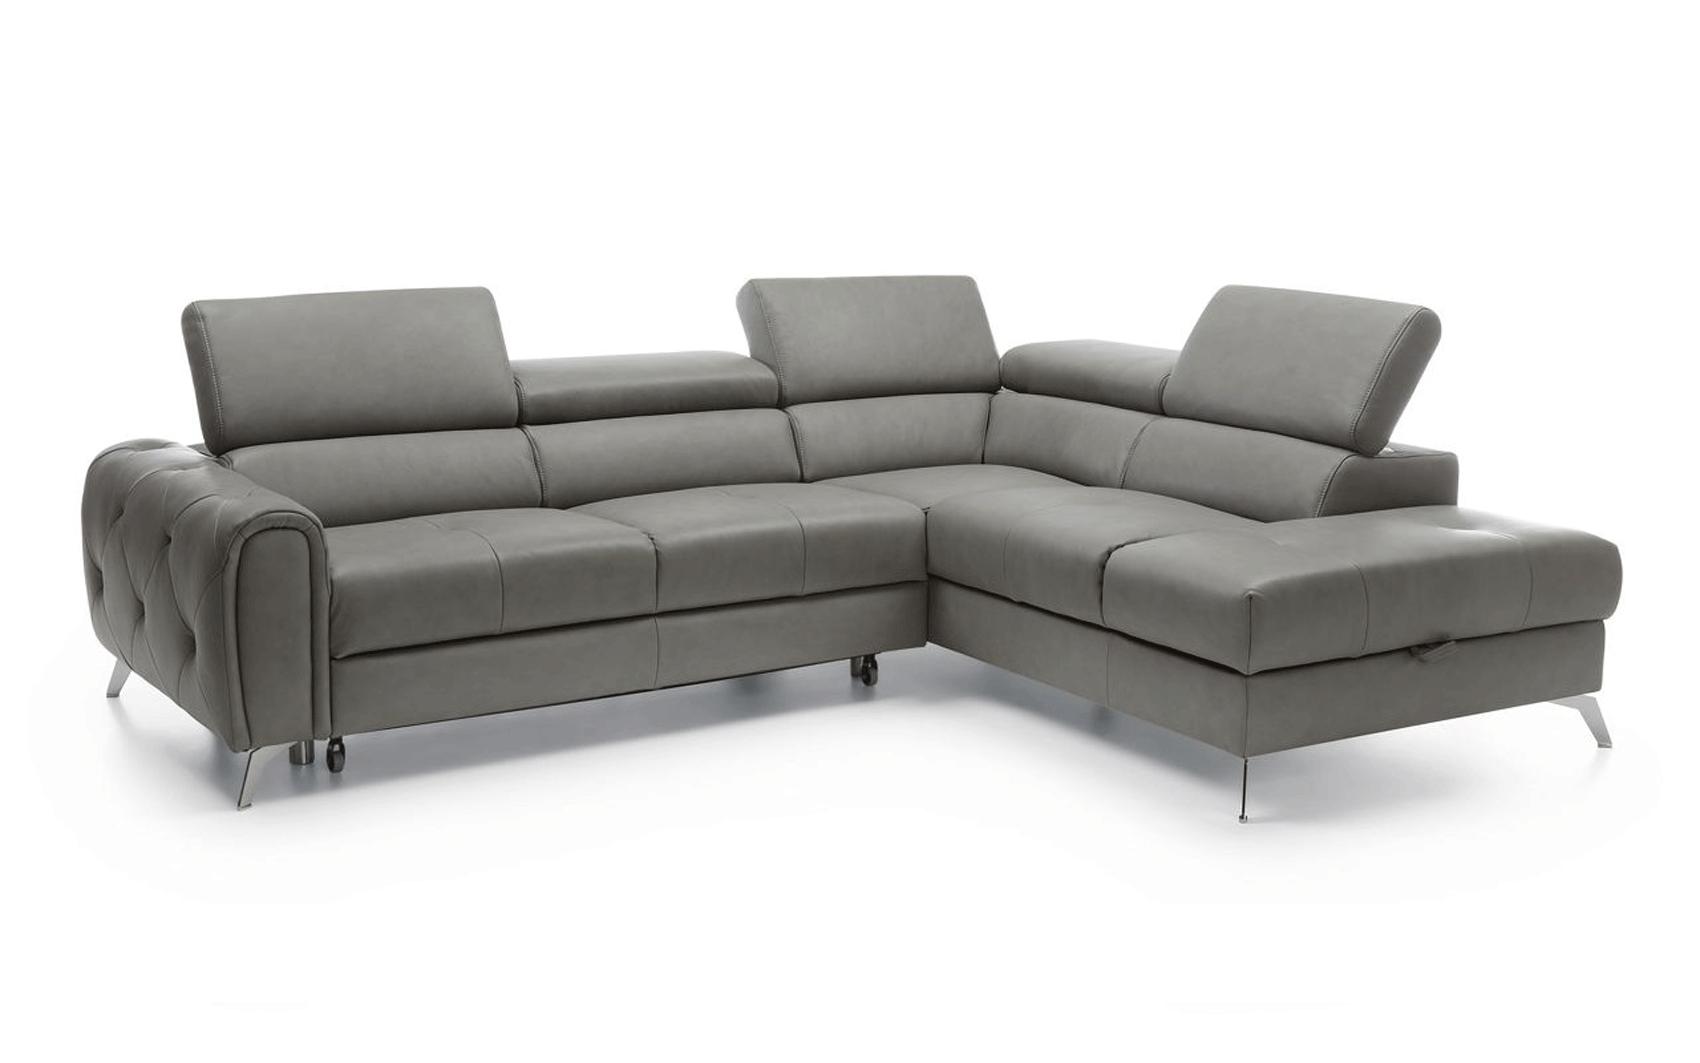 Contemporary, Modern Sectional Sofa Bed Camelia CAMELIASECTIONALRIGH in Gray Genuine Leather